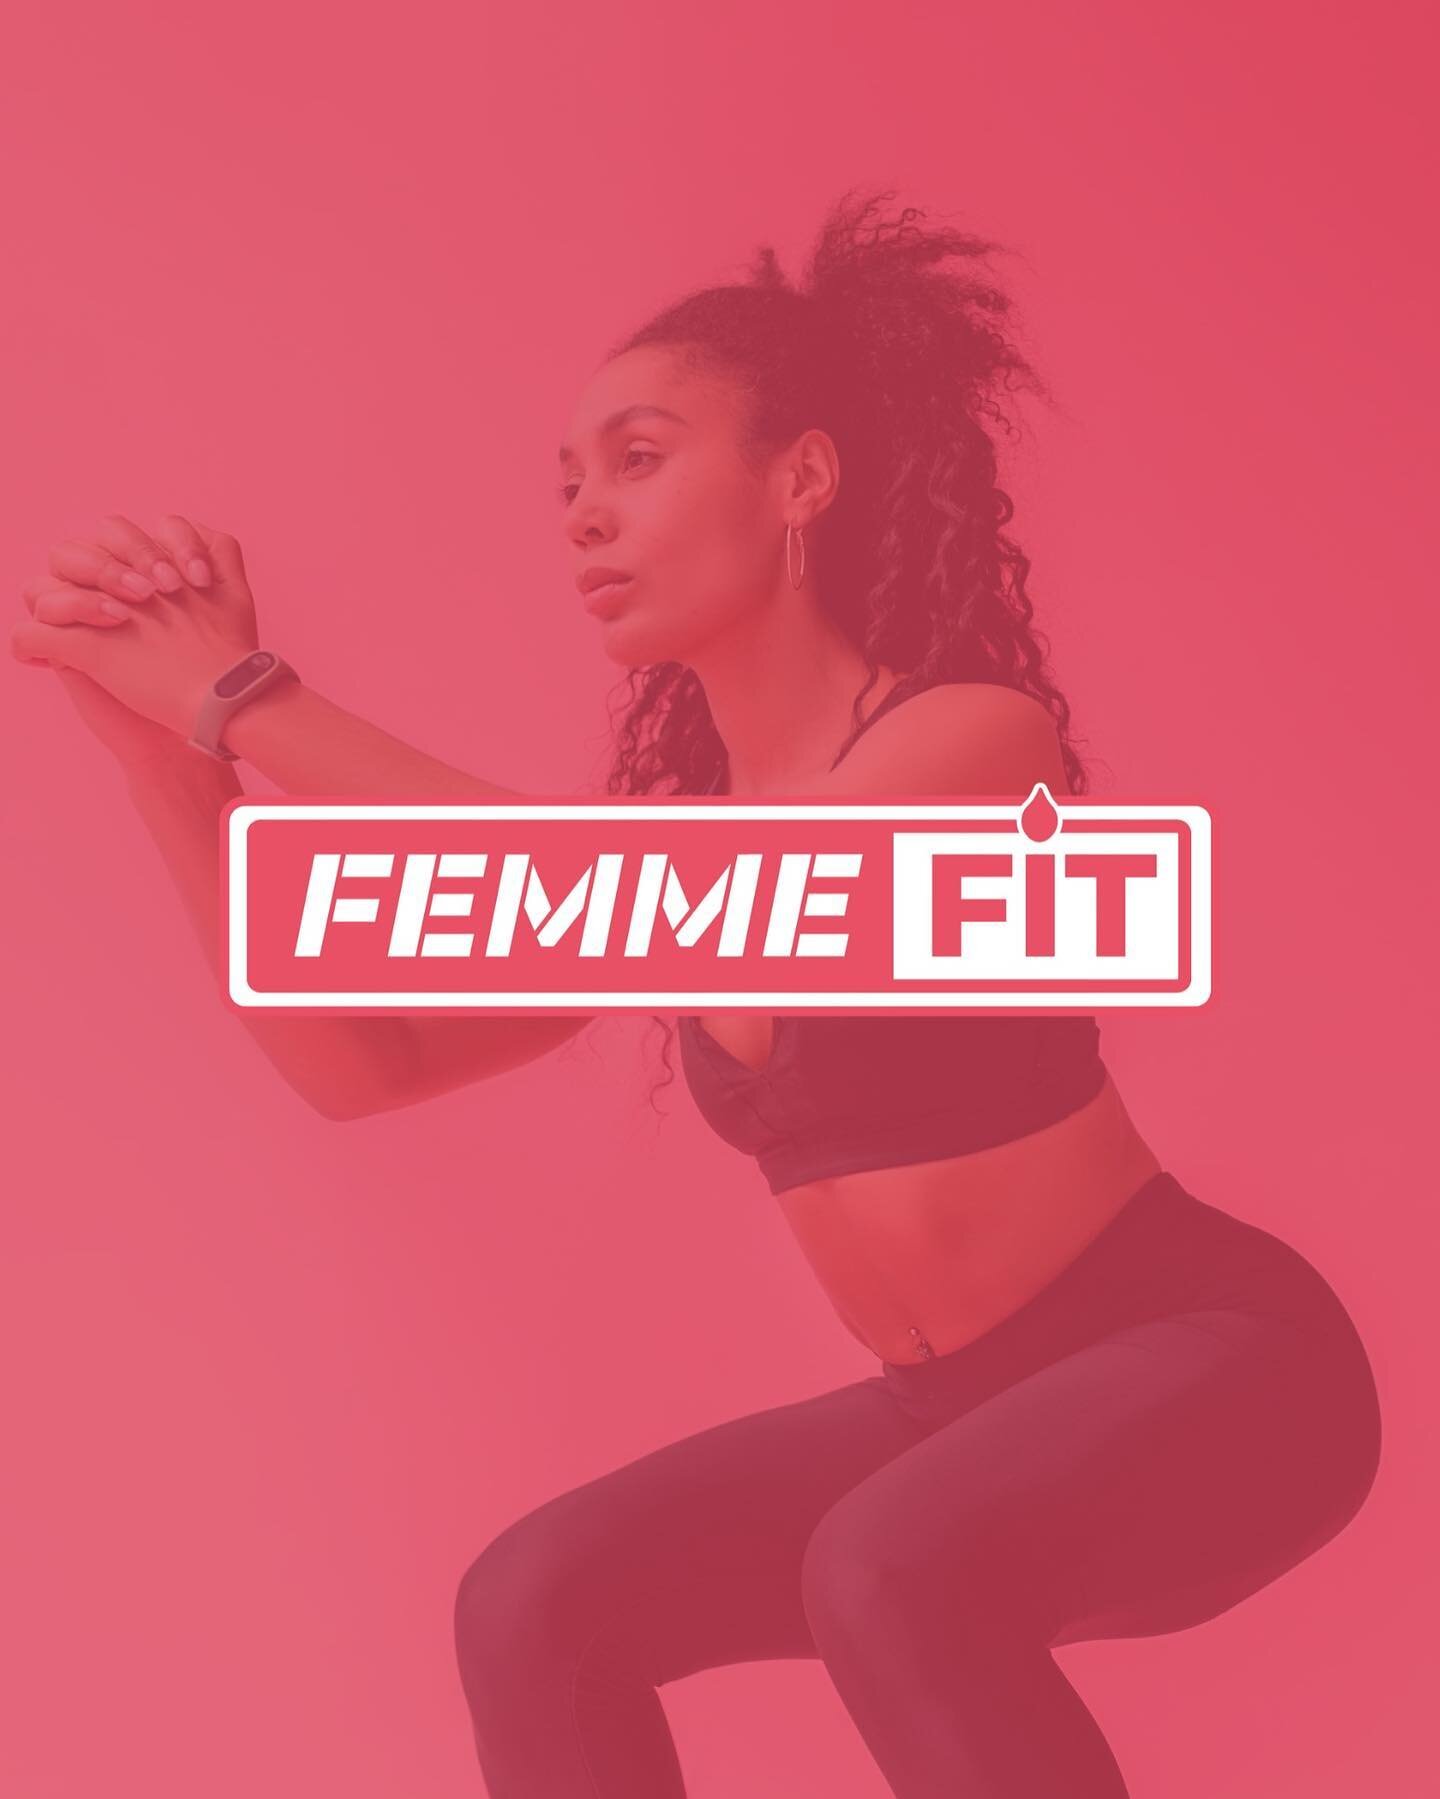 I just finished up a brand identity and packaging design project for the brand FemmeFit, a women&rsquo;s sport nutrition brand dedicated to empowering women to succeed at their fitness goals. 

This branding project features a comprehensive logo suit